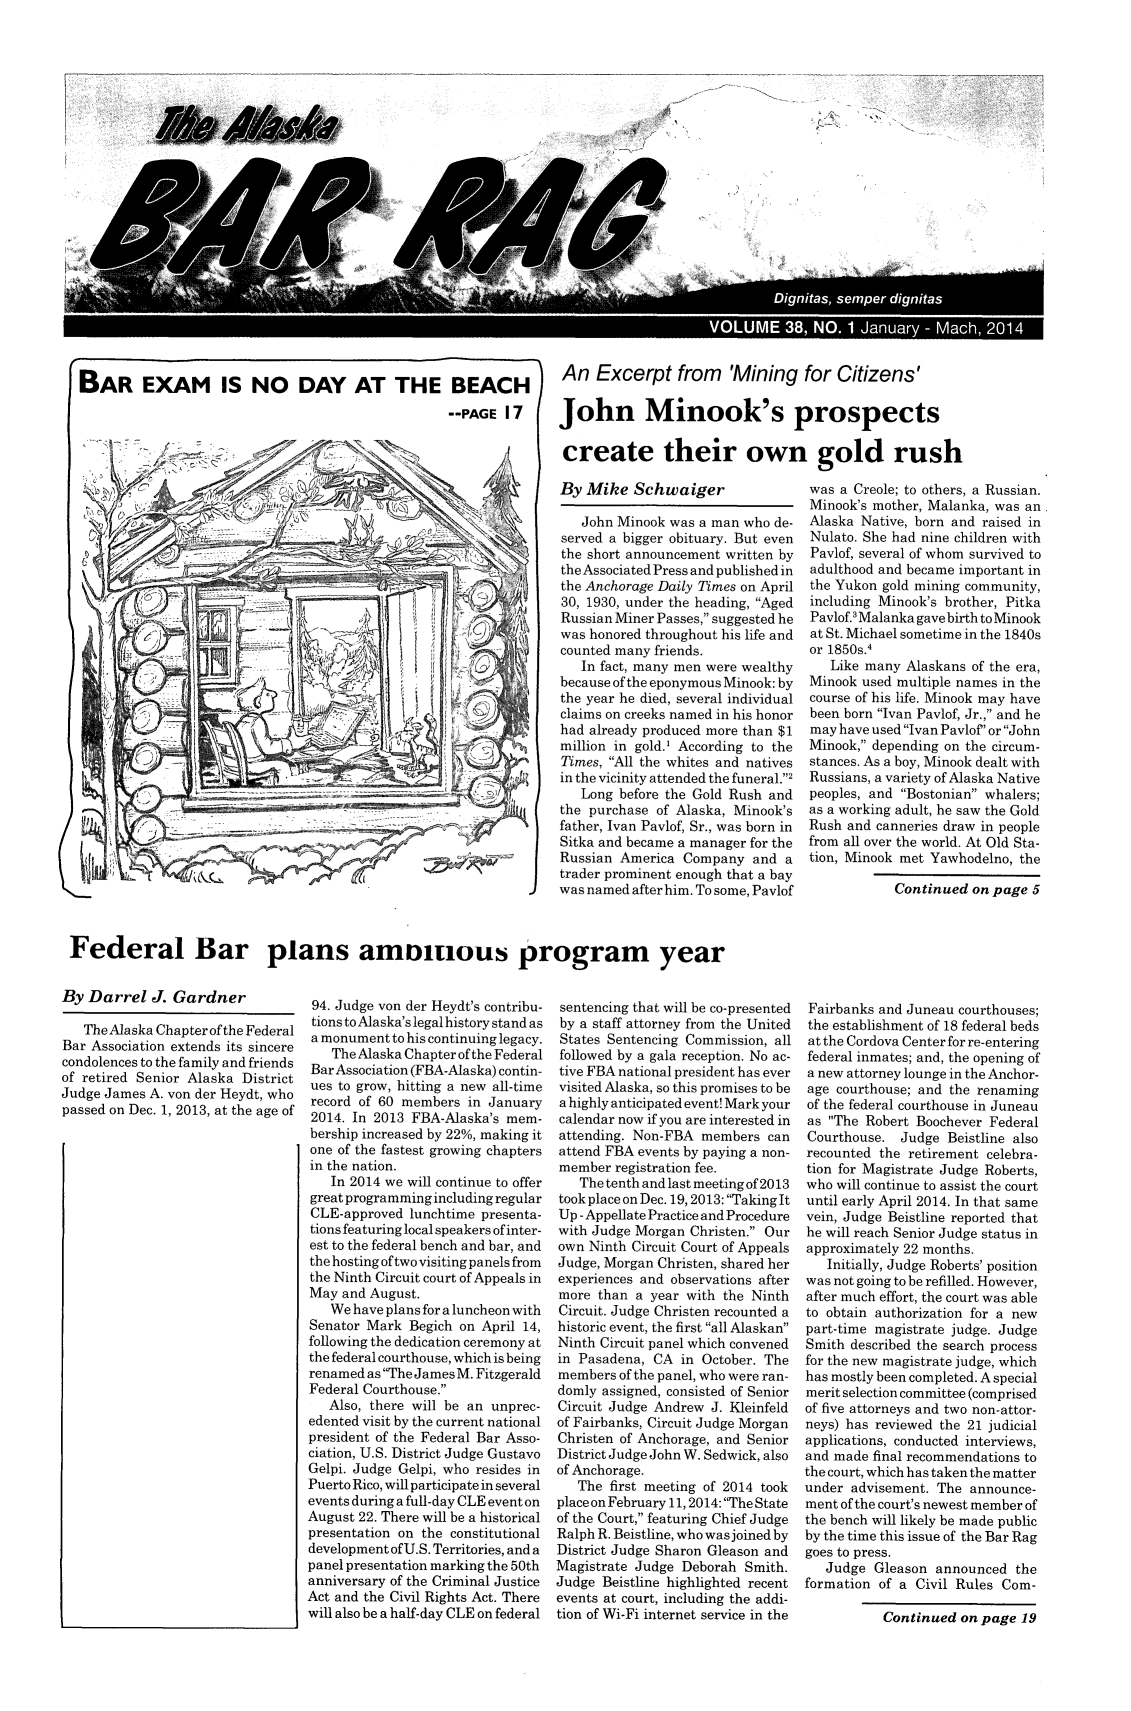 handle is hein.barjournals/askabar0038 and id is 1 raw text is: k,

VOLUME 38, NO. 1 January - Mach, 2014
BAR EXAM IS NO DAY AT THE BEACH        An Excerpt from 'Mining for Citizens'
--PAGE 17  John Minook's prospects
create their own gold rush

By Mike Schwaiger
John Minook was a man who de-
served a bigger obituary. But even
the short announcement written by
the Associated Press and published in
the Anchorage Daily Times on April
30, 1930, under the heading, Aged
Russian Miner Passes, suggested he
was honored throughout his life and
counted many friends.
In fact, many men were wealthy
because of the eponymous Minook: by
the year he died, several individual
claims on creeks named in his honor
had already produced more than $1
million in gold.' According to the
Times, All the whites and natives
in the vicinity attended the funeral.2
Long before the Gold Rush and
the purchase of Alaska, Minook's
father, Ivan Pavlof, Sr., was born in
Sitka and became a manager for the
Russian America Company and a
trader prominent enough that a bay
was named after him. To some, Pavlof

was a Creole; to others, a Russian.
Minook's mother, Malanka, was an
Alaska Native, born and raised in
Nulato. She had nine children with
Pavlof, several of whom survived to
adulthood and became important in
the Yukon gold mining community,
including Minook's brother, Pitka
Pavlof.' Malanka gave birth to Minook
at St. Michael sometime in the 1840s
or 1850s.4
Like many Alaskans of the era,
Minook used multiple names in the
course of his life. Minook may have
been born Ivan Pavlof, Jr., and he
may have used Ivan Pavlof' or John
Minook, depending on the circum-
stances. As a boy, Minook dealt with
Russians, a variety of Alaska Native
peoples, and Bostonian whalers;
as a working adult, he saw the Gold
Rush and canneries draw in people
from all over the world. At Old Sta-
tion, Minook met Yawhodelno, the
Continued on page 5

Federal Bar plans amonuous program year

By Darrel J. Gardner
The Alaska Chapter ofthe Federal
Bar Association extends its sincere
condolences to the family and friends
of retired Senior Alaska District
Judge James A. von der Heydt, who
passed on Dec. 1, 2013, at the age of

94. Judge von der Heydt's contribu-
tions to Alaska's legal history stand as
a monument to his continuing legacy.
The Alaska Chapter of the Federal
Bar Association (FBA-Alaska) contin-
ues to grow, hitting a new all-time
record of 60 members in January
2014. In 2013 FBA-Alaska's mem-
bership increased by 22%, making it
one of the fastest growing chapters
in the nation.
In 2014 we will continue to offer
great programming including regular
CLE-approved lunchtime presenta-
tions featuring local speakers of inter-
est to the federal bench and bar, and
the hosting of two visiting panels from
the Ninth Circuit court of Appeals in
May and August.
We have plans for a luncheon with
Senator Mark Begich on April 14,
following the dedication ceremony at
the federal courthouse, which is being
renamed as The James M. Fitzgerald
Federal Courthouse.
Also, there will be an unprec-
edented visit by the current national
president of the Federal Bar Asso-
ciation, U.S. District Judge Gustavo
Gelpi. Judge Gelpi, who resides in
Puerto Rico, will participate in several
events during a full-day CLE event on
August 22. There will be a historical
presentation on the constitutional
development of U.S. Territories, and a
panel presentation marking the 50th
anniversary of the Criminal Justice
Act and the Civil Rights Act. There
will also be a half-day CLE on federal

sentencing that will be co-presented
by a staff attorney from the United
States Sentencing Commission, all
followed by a gala reception. No ac-
tive FBA national president has ever
visited Alaska, so this promises to be
a highly anticipated event! Mark your
calendar now if you are interested in
attending. Non-FBA members can
attend FBA events by paying a non-
member registration fee.
The tenth and last meeting of 2013
took place on Dec. 19,2013: Taking It
Up - Appellate Practice and Procedure
with Judge Morgan Christen. Our
own Ninth Circuit Court of Appeals
Judge, Morgan Christen, shared her
experiences and observations after
more than a year with the Ninth
Circuit. Judge Christen recounted a
historic event, the first all Alaskan
Ninth Circuit panel which convened
in Pasadena, CA in October. The
members of the panel, who were ran-
domly assigned, consisted of Senior
Circuit Judge Andrew J. Kleinfeld
of Fairbanks, Circuit Judge Morgan
Christen of Anchorage, and Senior
District Judge John W. Sedwick, also
of Anchorage.
The first meeting of 2014 took
place on February 11, 2014: The State
of the Court, featuring Chief Judge
Ralph R. Beistline, who was joined by
District Judge Sharon Gleason and
Magistrate Judge Deborah Smith.
Judge Beistline highlighted recent
events at court, including the addi-
tion of Wi-Fi internet service in the

Fairbanks and Juneau courthouses;
the establishment of 18 federal beds
at the Cordova Center for re-entering
federal inmates; and, the opening of
a new attorney lounge in the Anchor-
age courthouse; and the renaming
of the federal courthouse in Juneau
as The Robert Boochever Federal
Courthouse. Judge Beistline also
recounted the retirement celebra-
tion for Magistrate Judge Roberts,
who will continue to assist the court
until early April 2014. In that same
vein, Judge Beistline reported that
he will reach Senior Judge status in
approximately 22 months.
Initially, Judge Roberts' position
was not going to be refilled. However,
after much effort, the court was able
to obtain authorization for a new
part-time magistrate judge. Judge
Smith described the search process
for the new magistrate judge, which
has mostly been completed. A special
merit selection committee (comprised
of five attorneys and two non-attor-
neys) has reviewed the 21 judicial
applications, conducted interviews,
and made final recommendations to
the court, which has taken the matter
under advisement. The announce-
ment of the court's newest member of
the bench will likely be made public
by the time this issue of the Bar Rag
goes to press.
Judge Gleason announced the
formation of a Civil Rules Com-
Continued on page 19

------ ----


